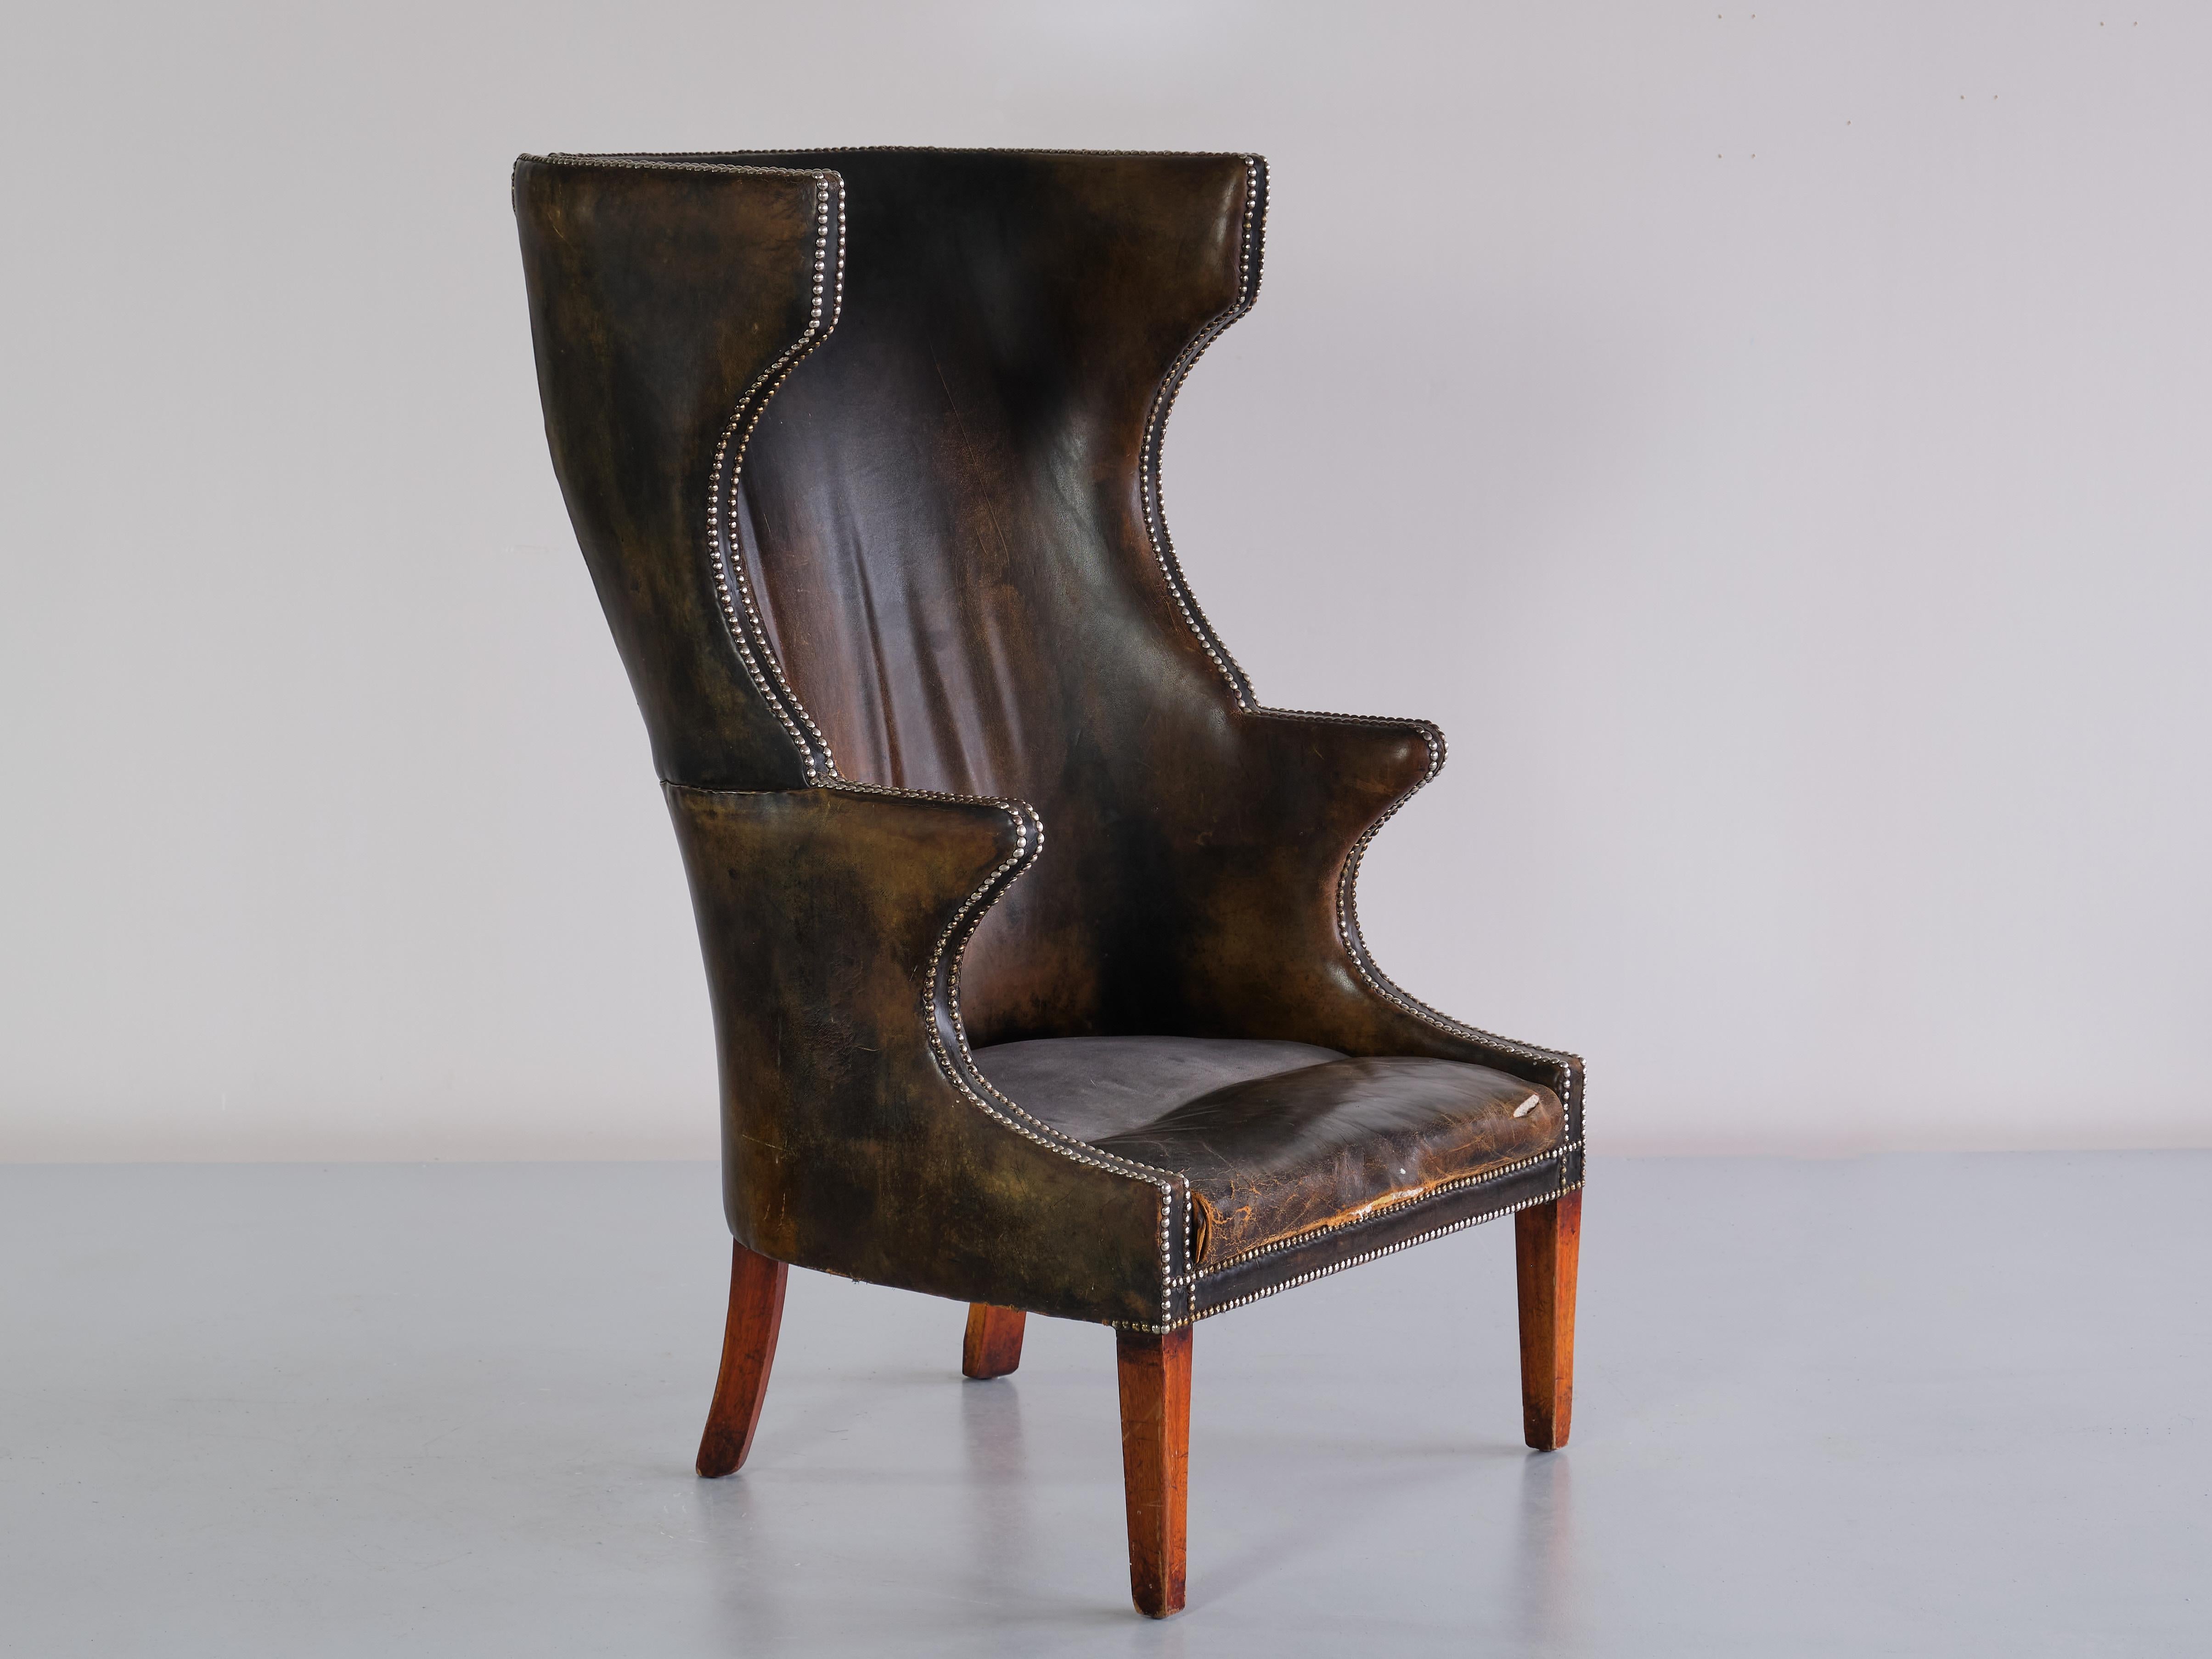 This exceptional wingback chair was produced by a Danish Cabinetmaker in the 1930s. The design is marked by its high back, distinct wings and curved armrests. The chair is a Danish modern interpretation of the classical British wing chair, with more